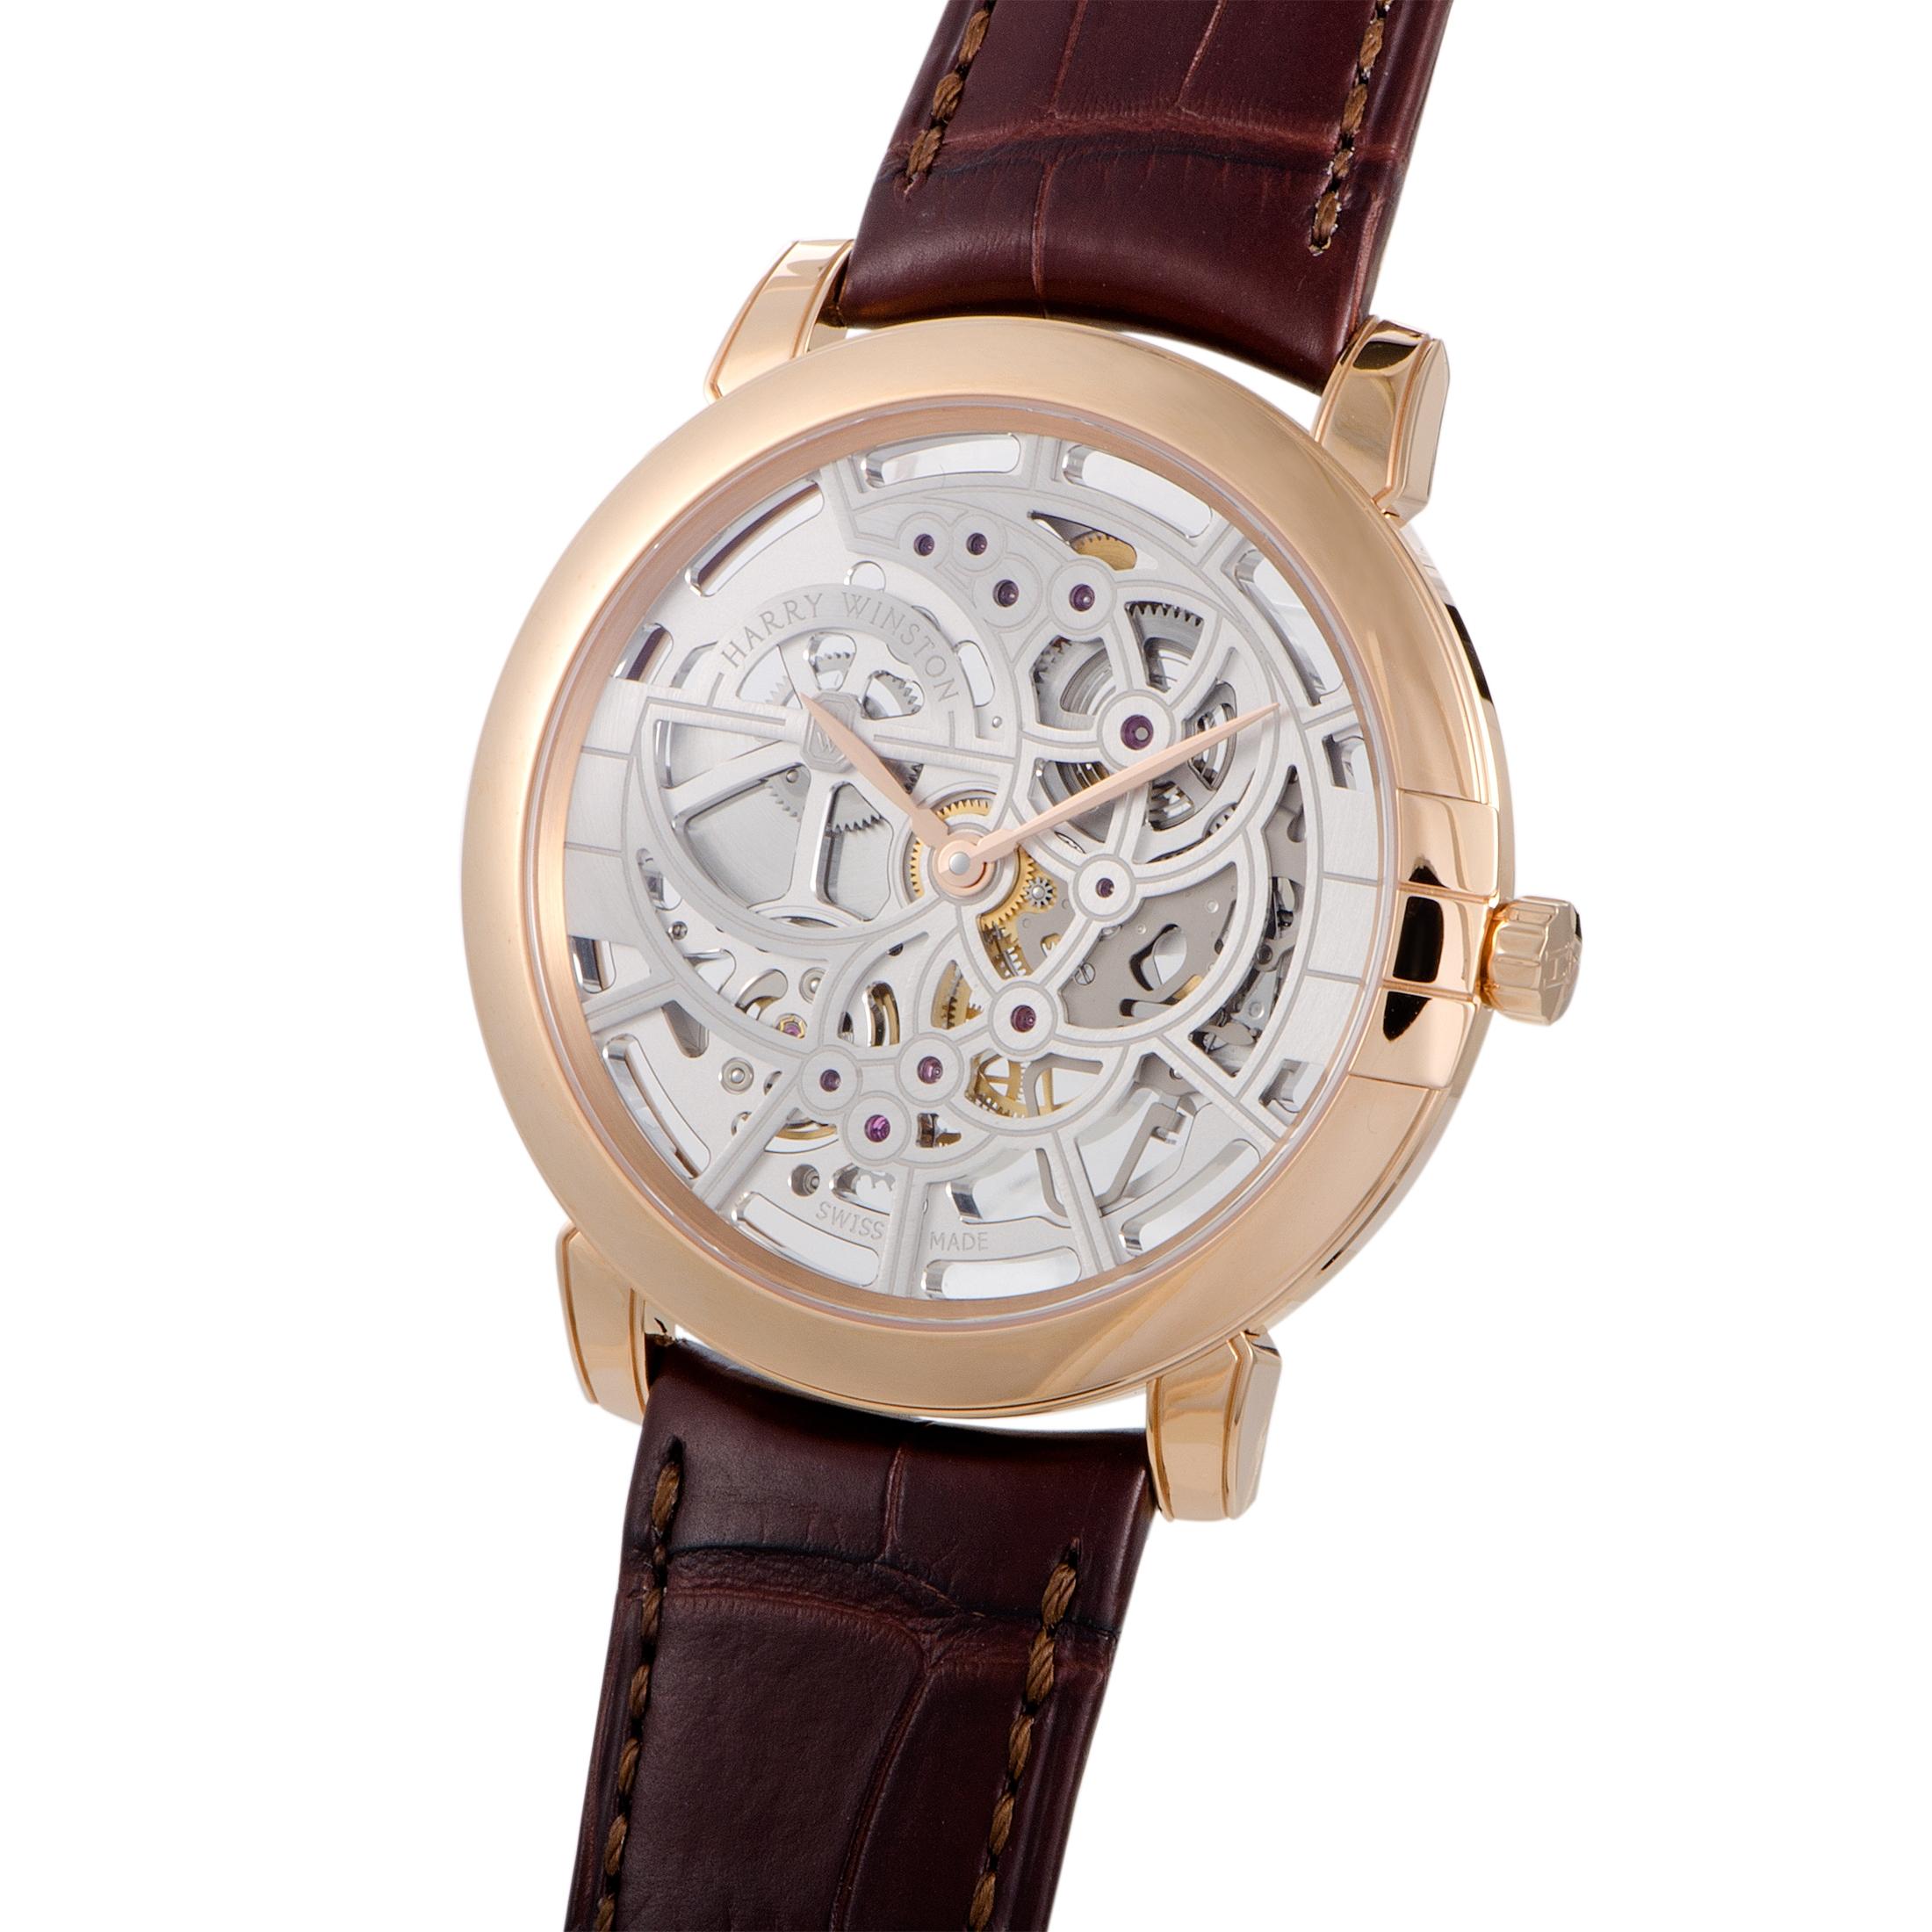 The Harry Winston Midnight Skeleton, reference number MIDAHM42RR001, is a member of the iconic “Midnight” collection.

The watch is presented with a 42 mm case that is made of 18K rose gold and boasts see-through sapphire crystal back, offering